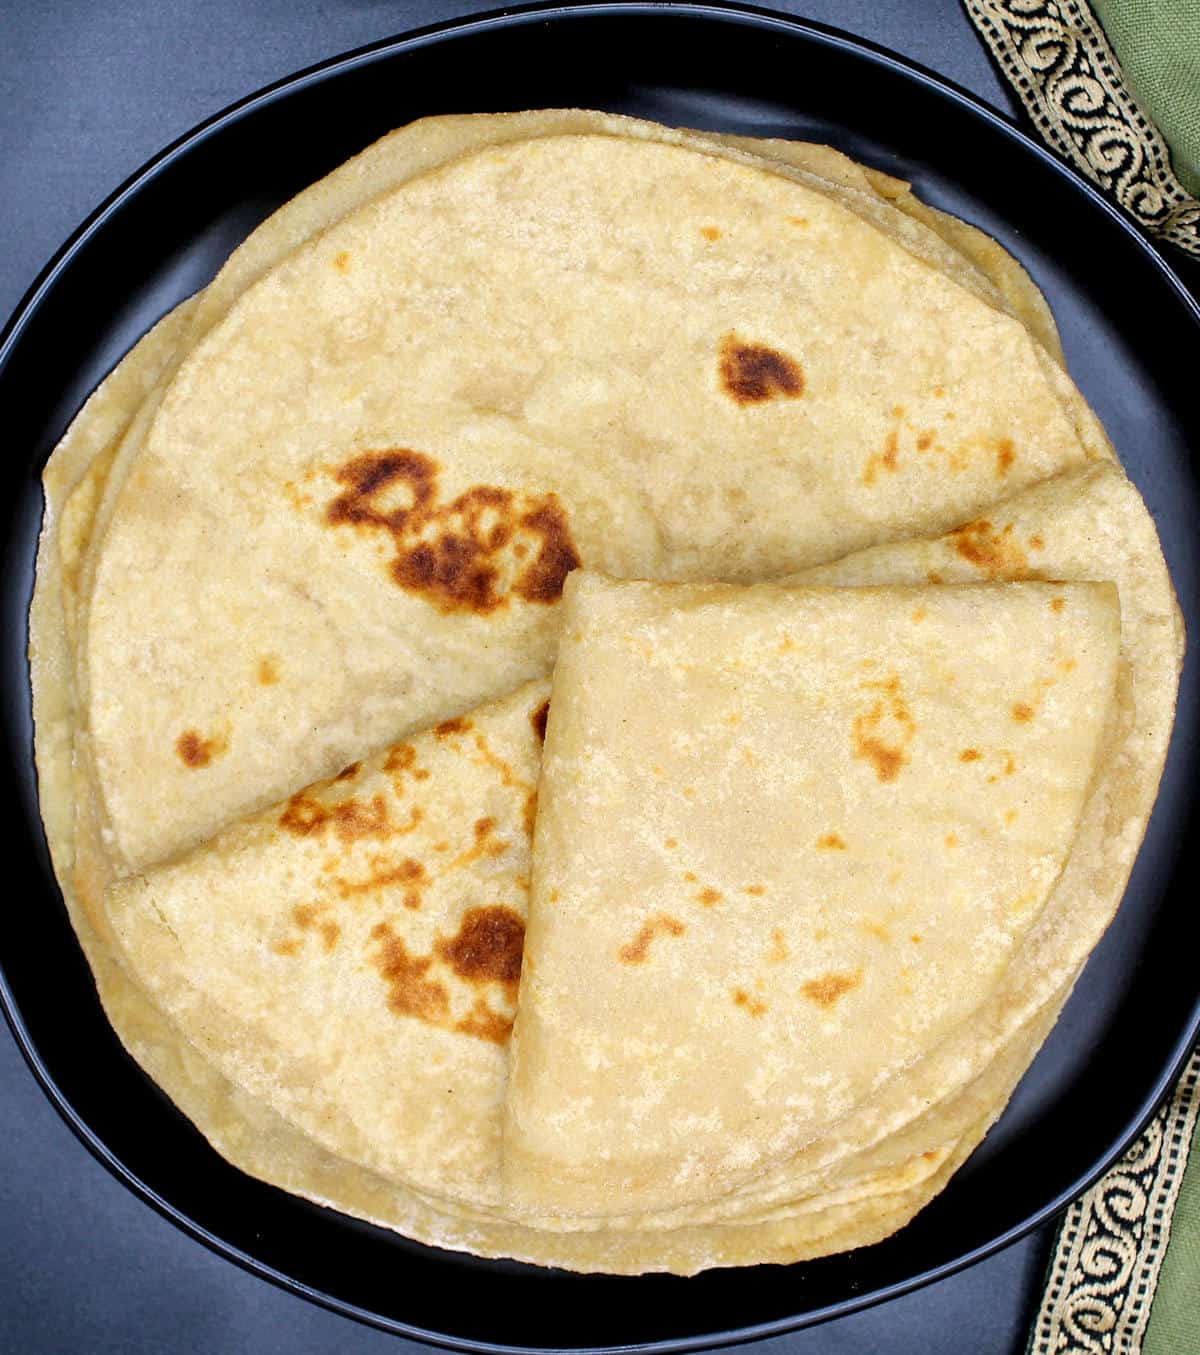 Overhead photo showing rotis folded and stacked on a black plate.